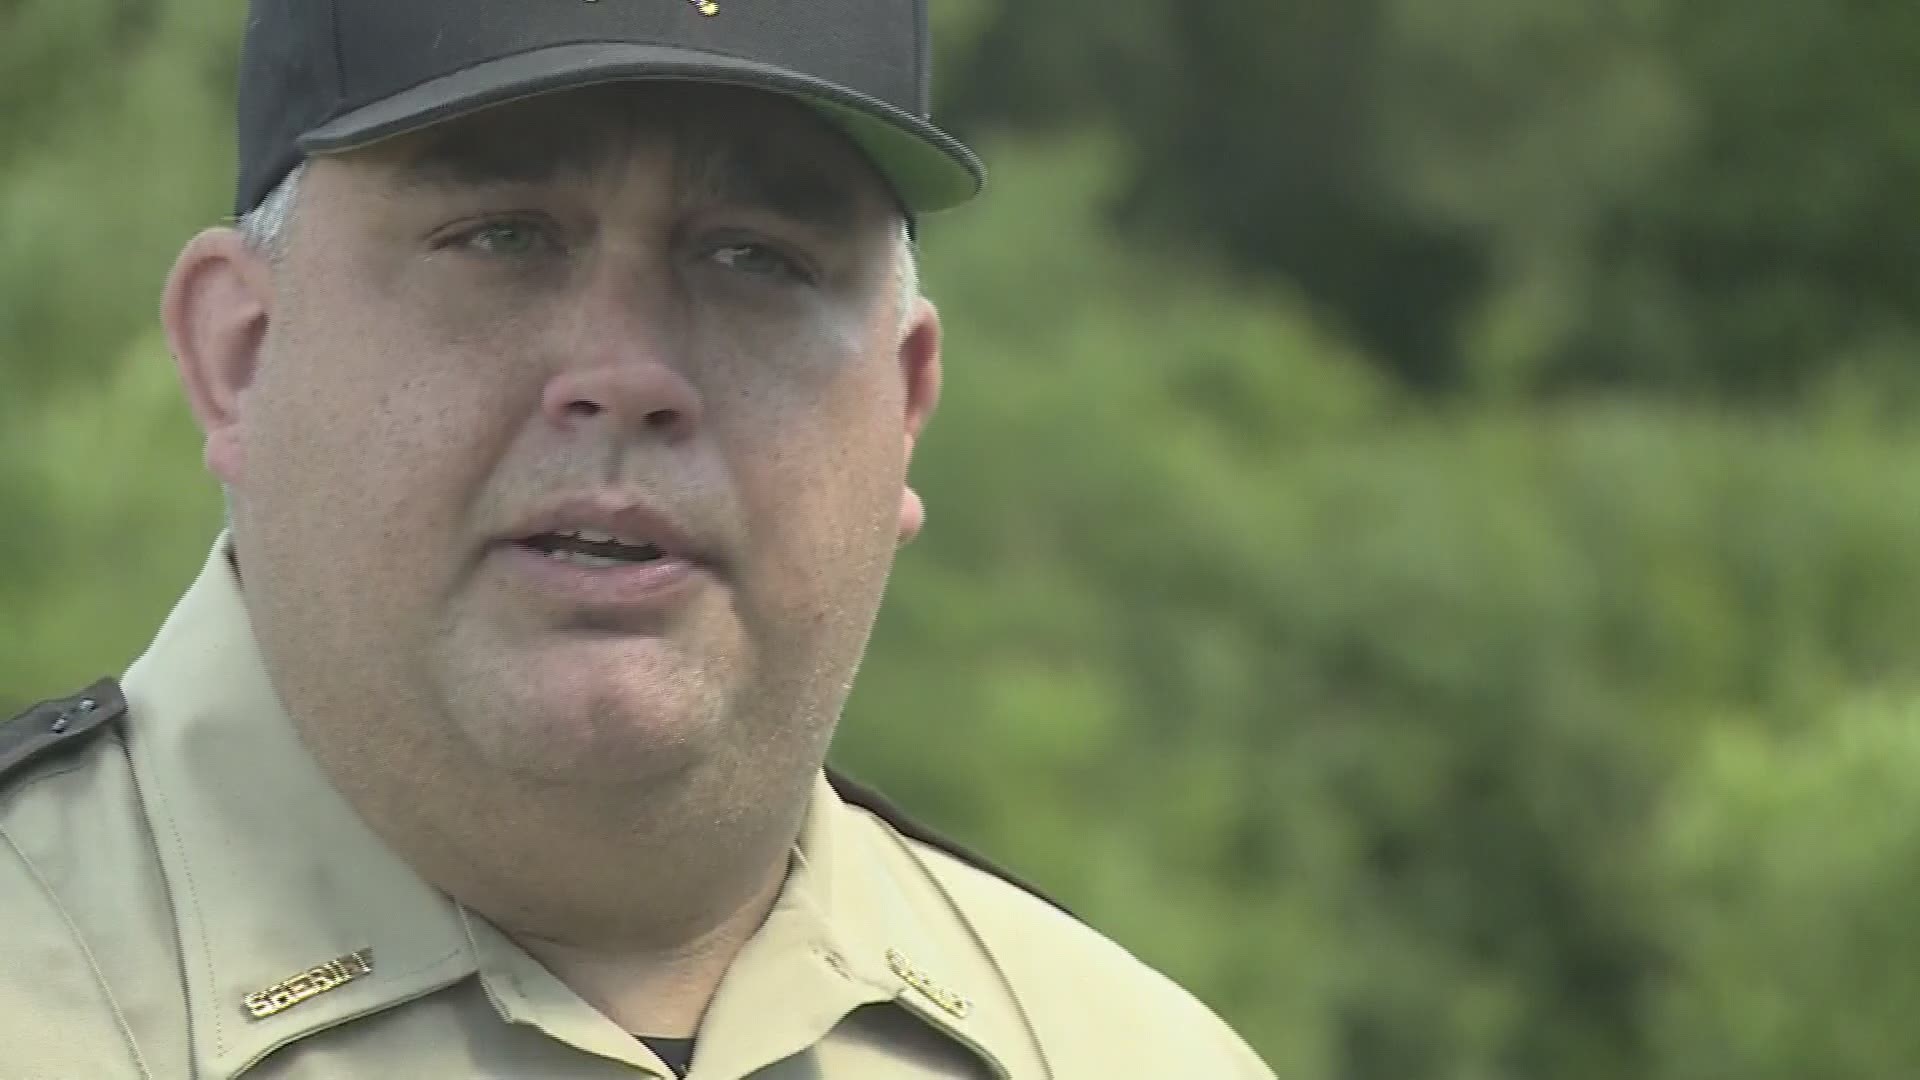 Hennepin County Sheriff David Hutchinson was both emotional and heartfelt as he detailed the recovery of a small child's body from the Mississippi River.